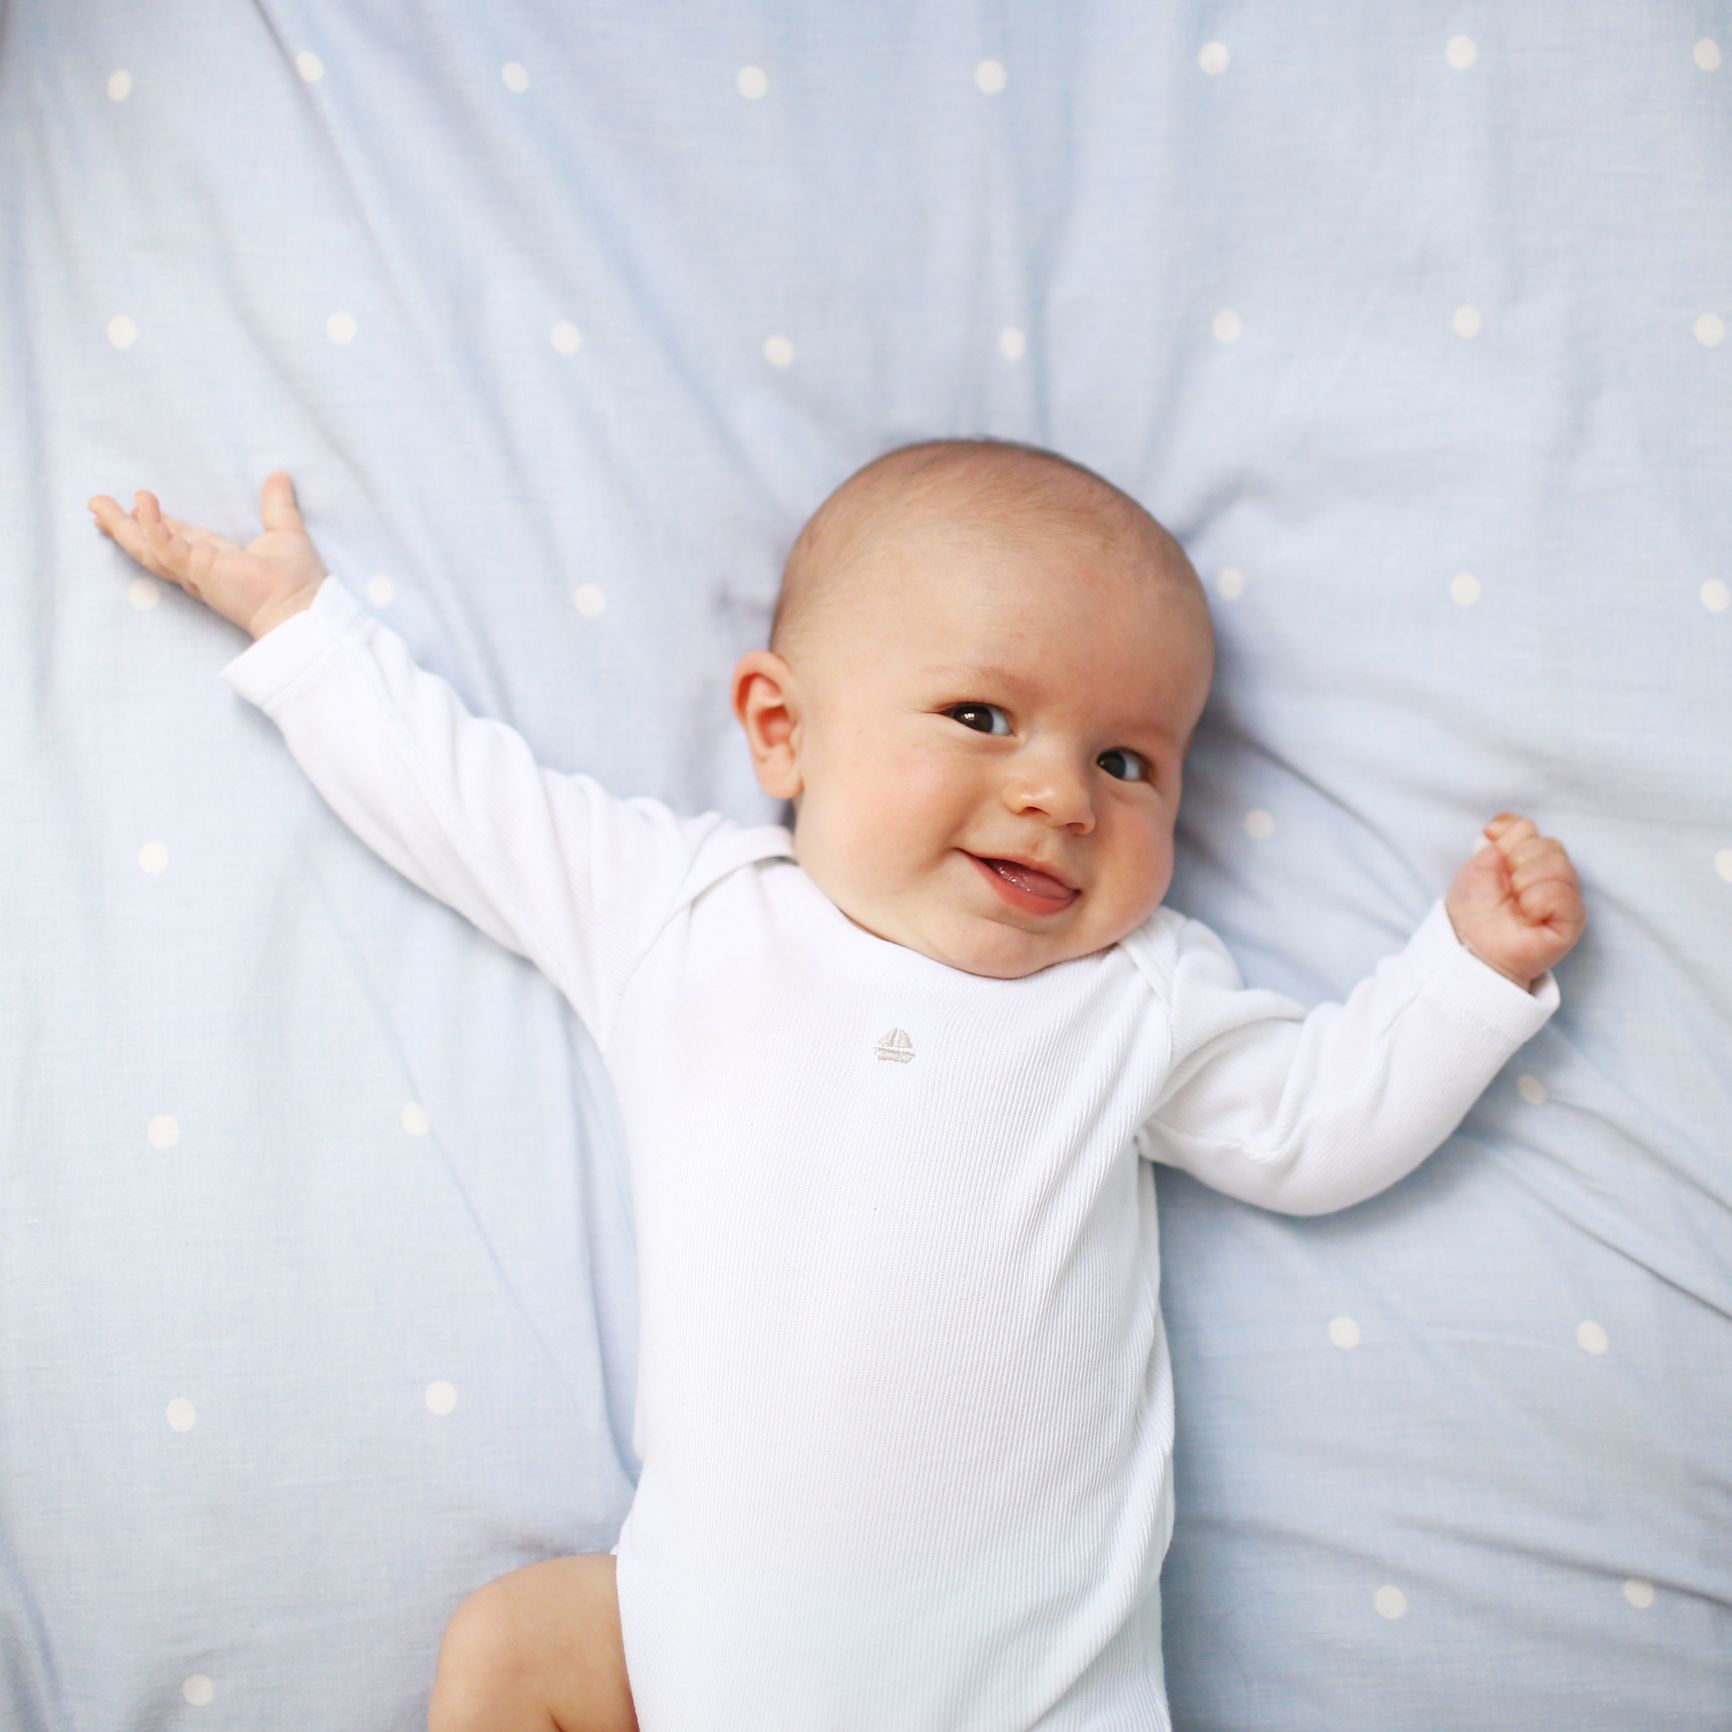 These are the most popular baby names of 2019 so far in the UK